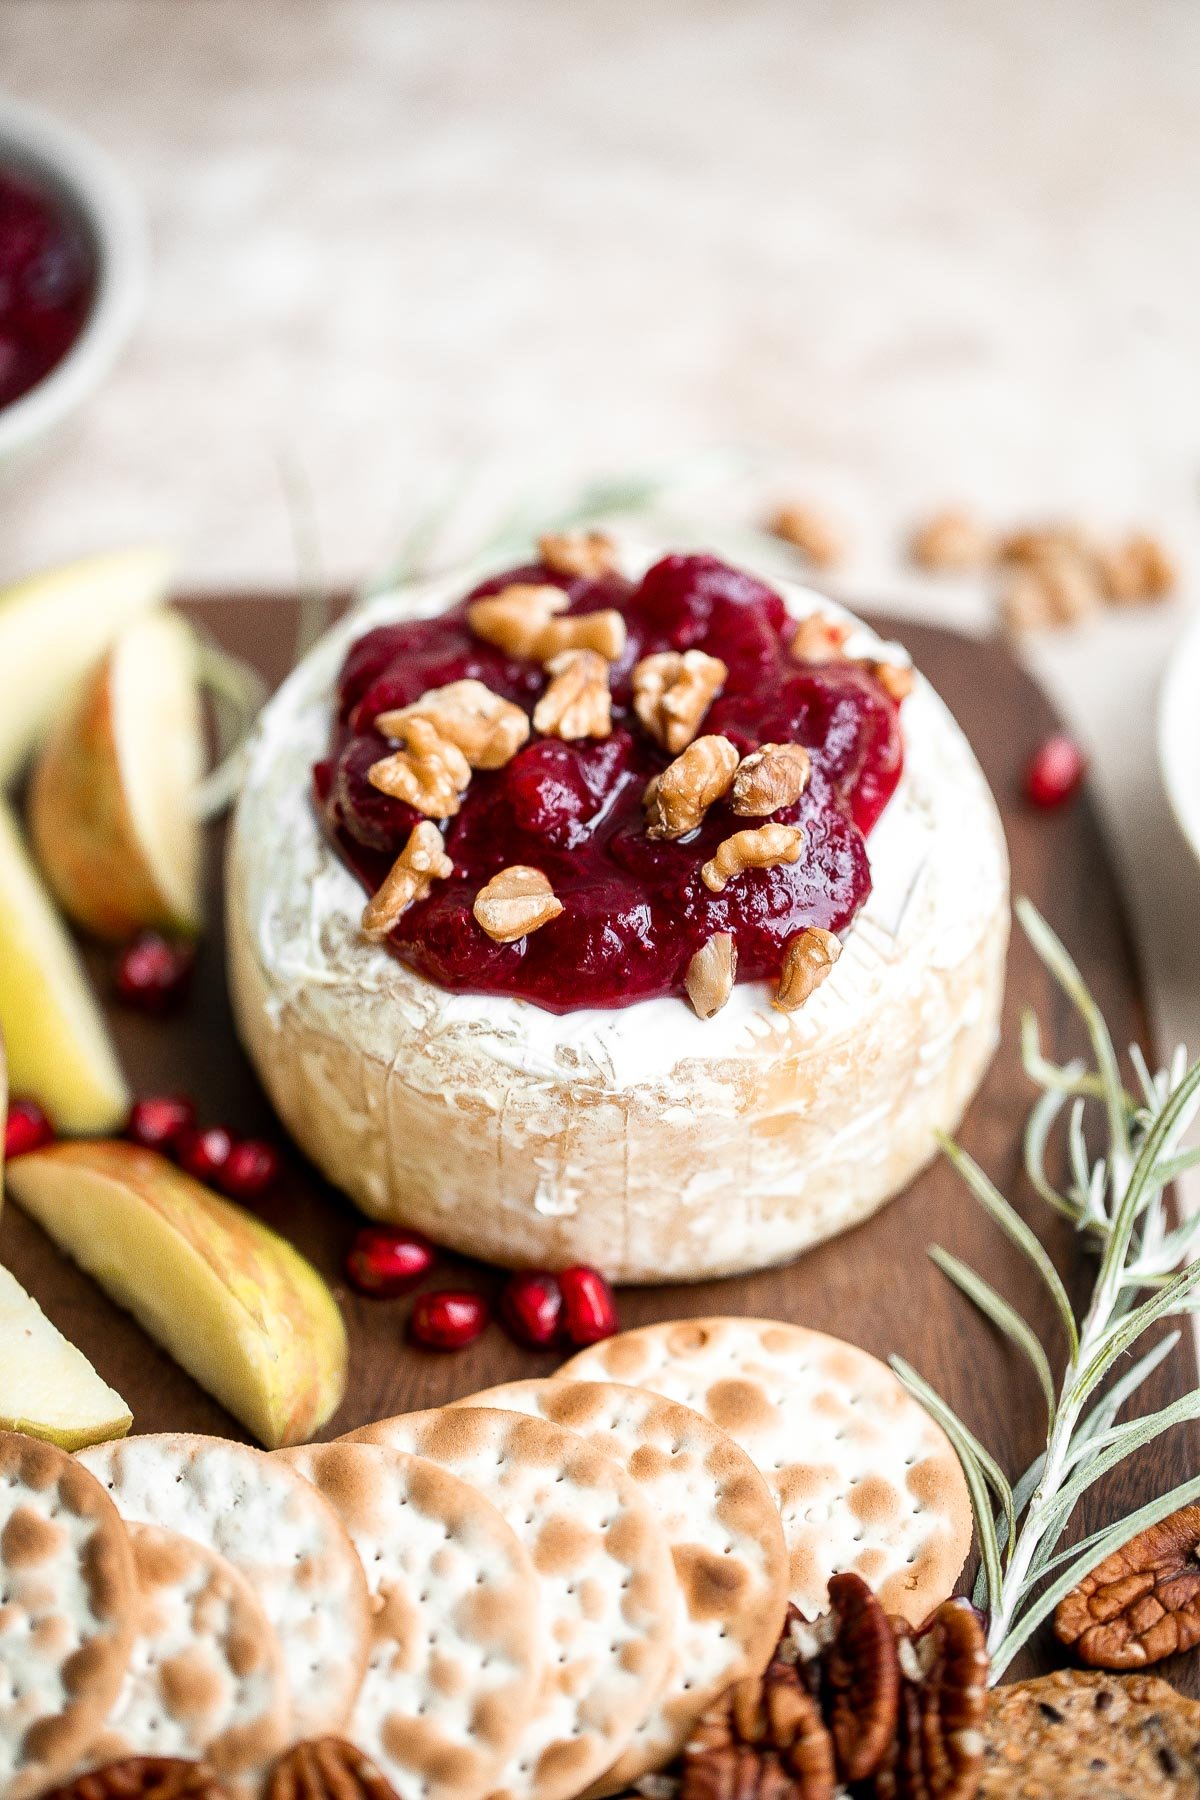 Cranberry baked brie is a sweet and savory appetizer you need to try this holiday season. It's quick and easy, melty and gooey, and so delicious. | aheadofthyme.com